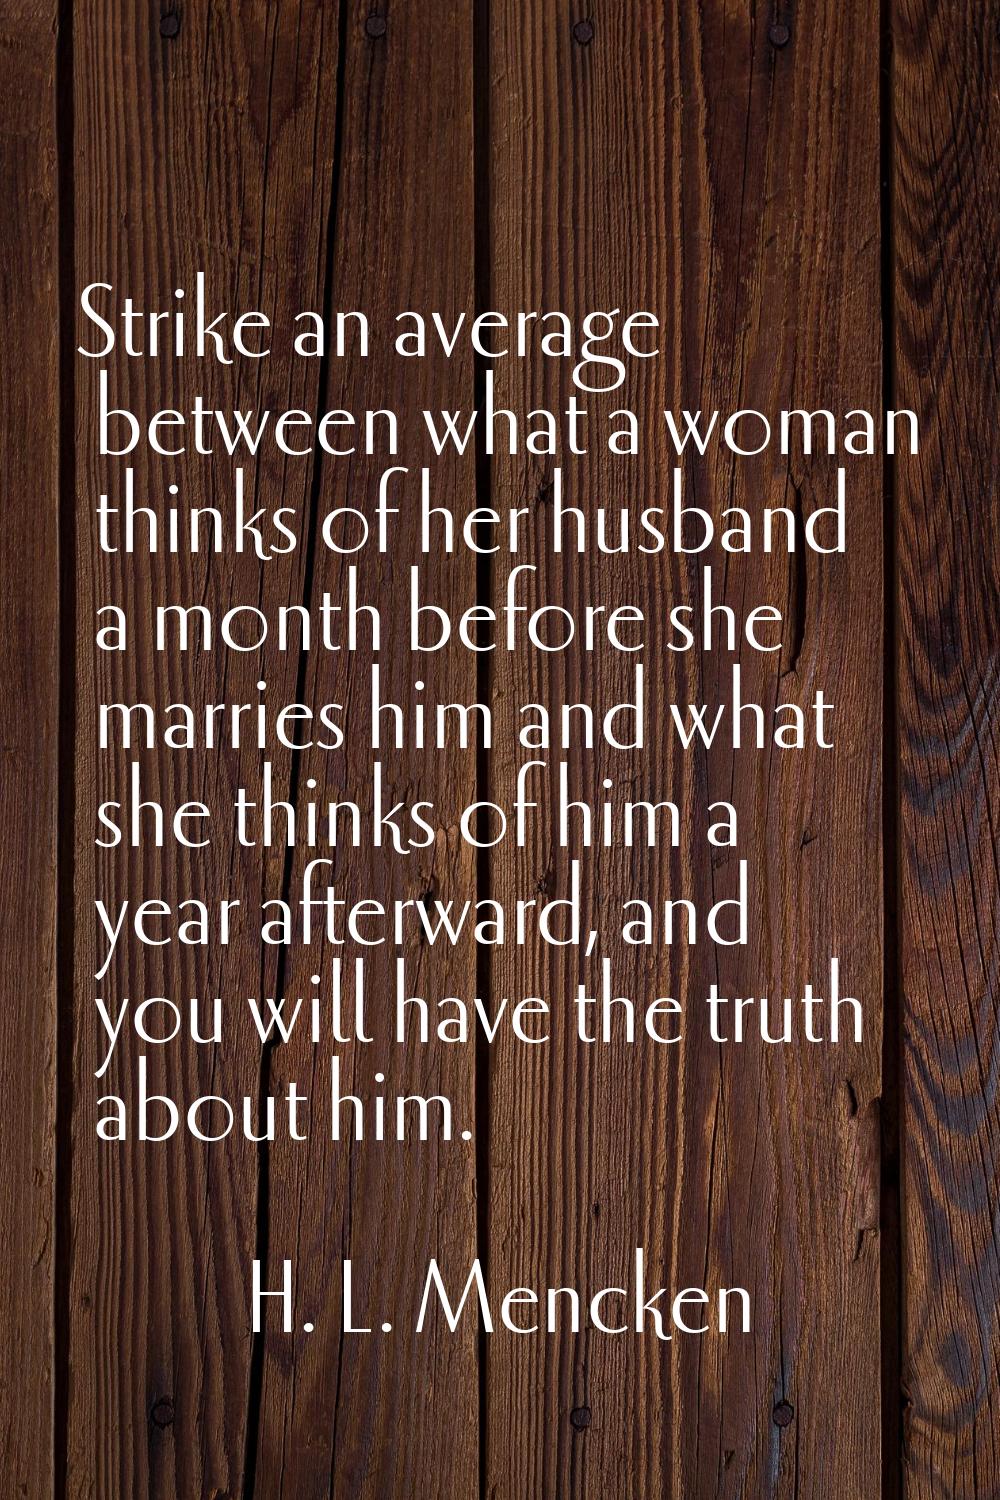 Strike an average between what a woman thinks of her husband a month before she marries him and wha